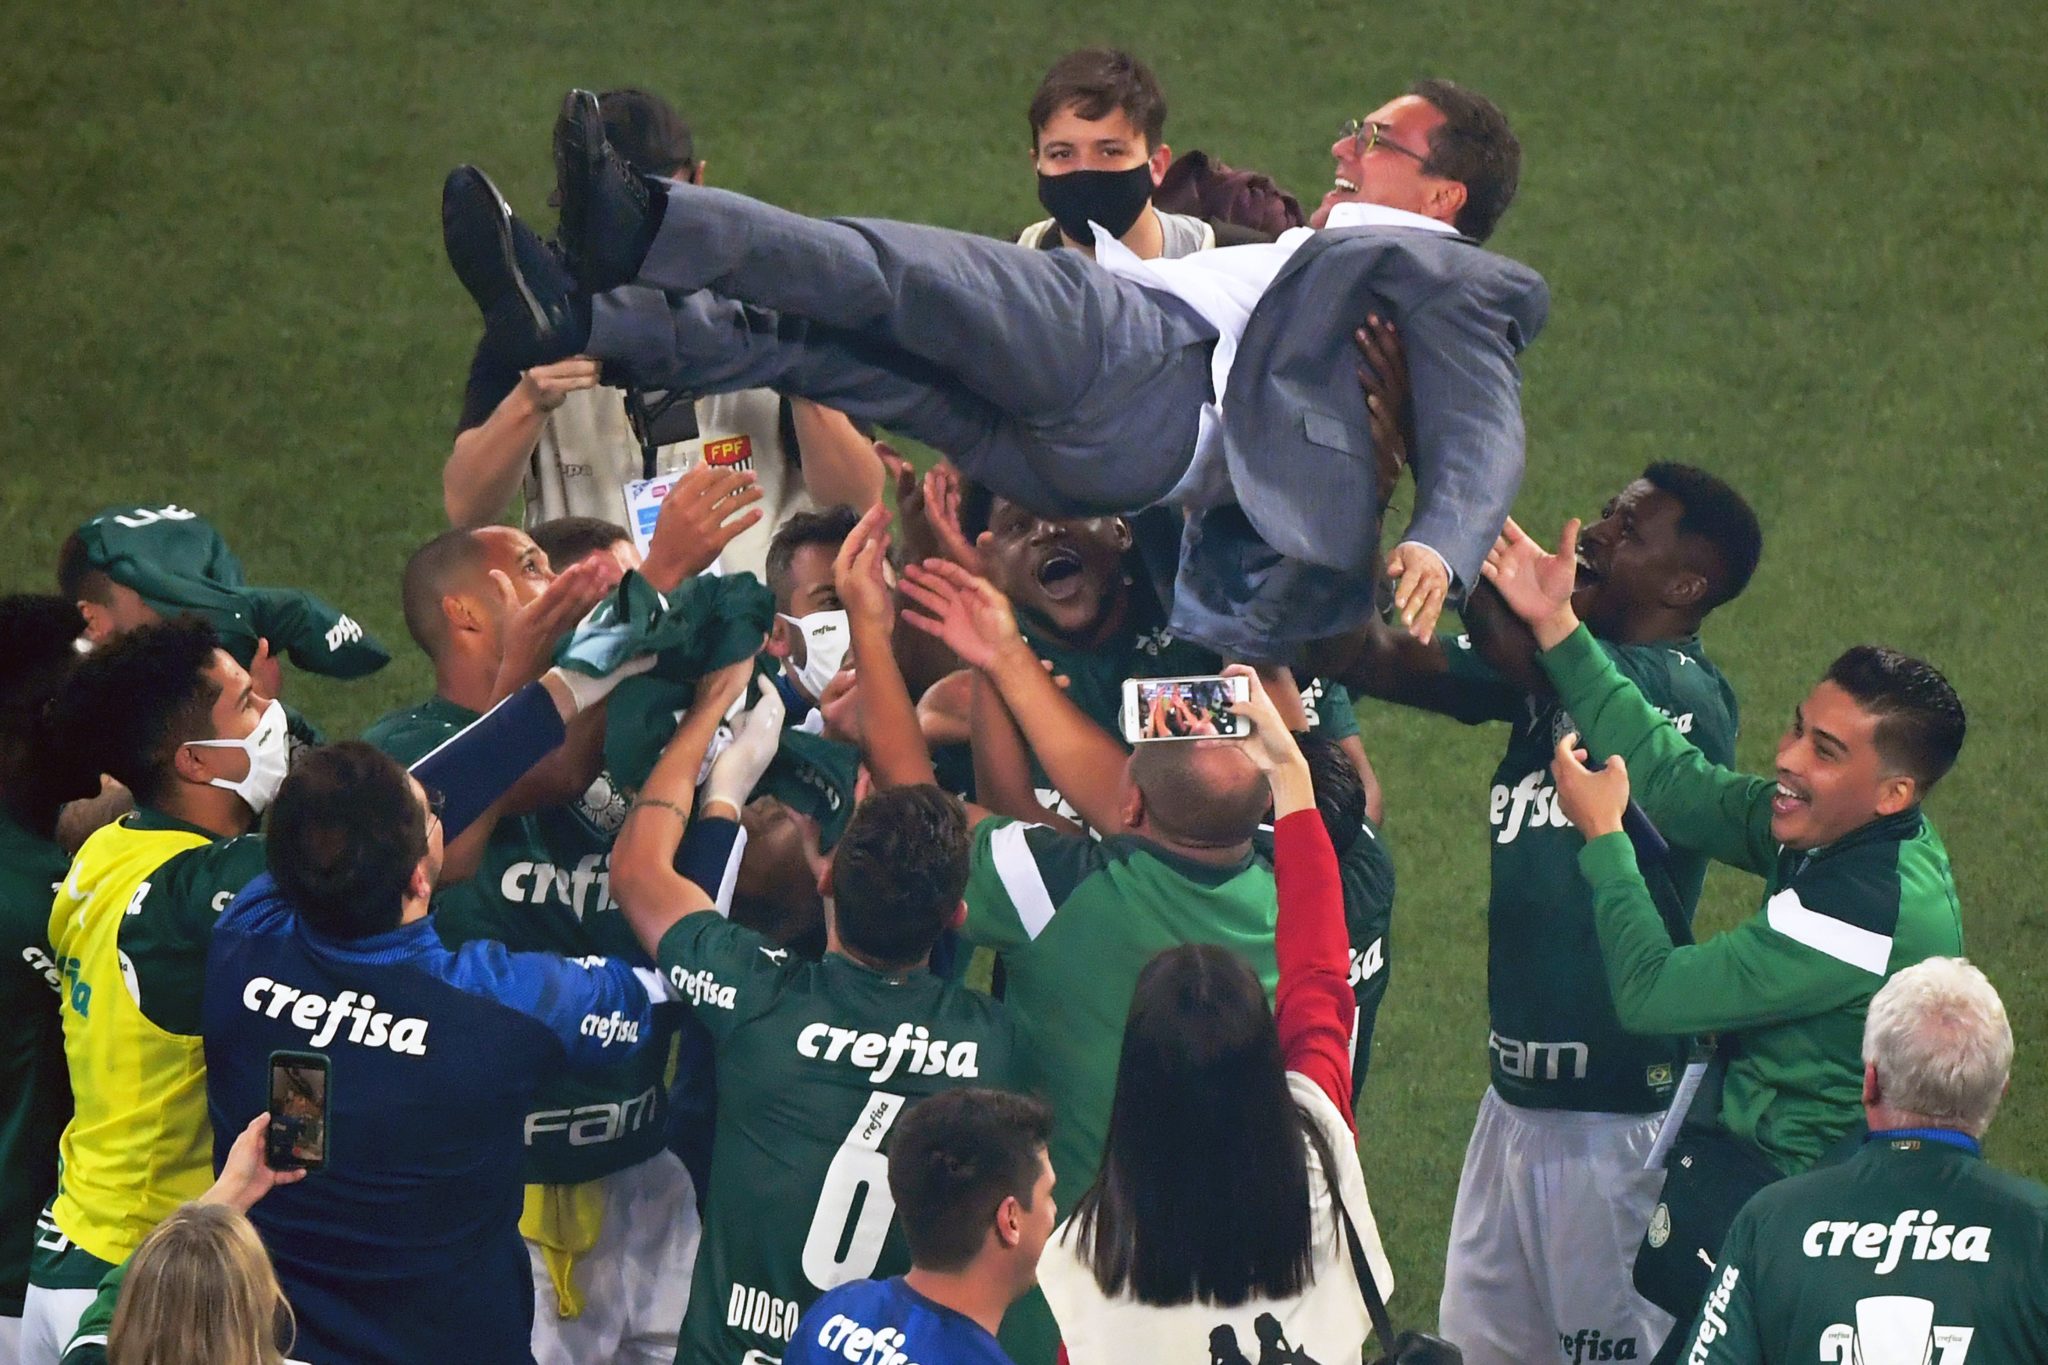 Players of Palmeiras throw coach Vanderlei Luxemburgo in the air after winning the Paulista championship final football match against Corinthians at the Allianz Parque stadium, in Sao Paulo, Brazil, on August 8, 2020, amid the COVID-19 novel coronavirus pandemic. (Photo by Nelson ALMEIDA / AFP) (Photo by NELSON ALMEIDA/AFP via Getty Images)